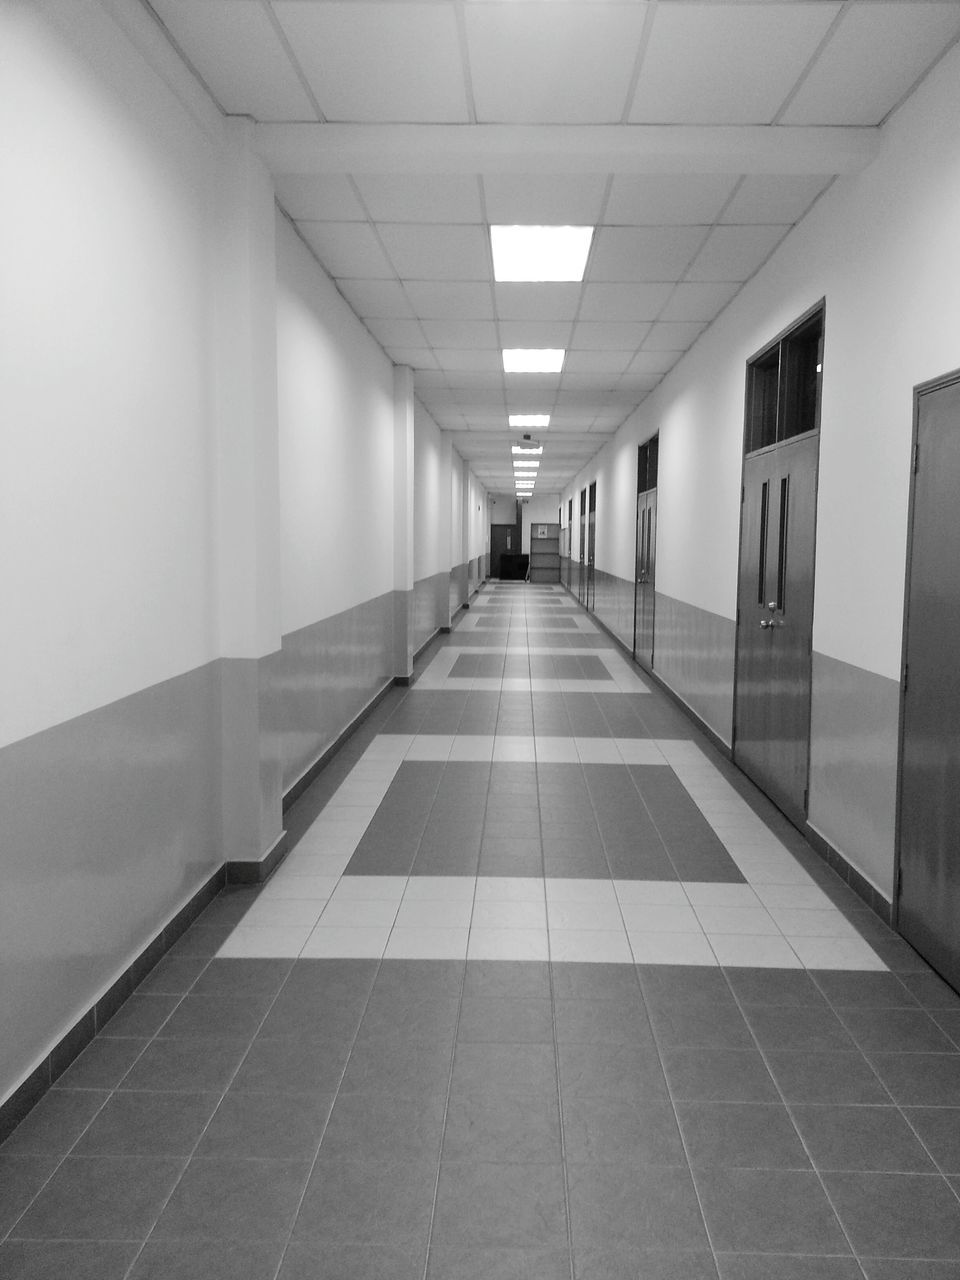 the way forward, architecture, indoors, built structure, diminishing perspective, corridor, ceiling, empty, vanishing point, long, lighting equipment, in a row, narrow, tiled floor, illuminated, building, absence, flooring, walkway, no people